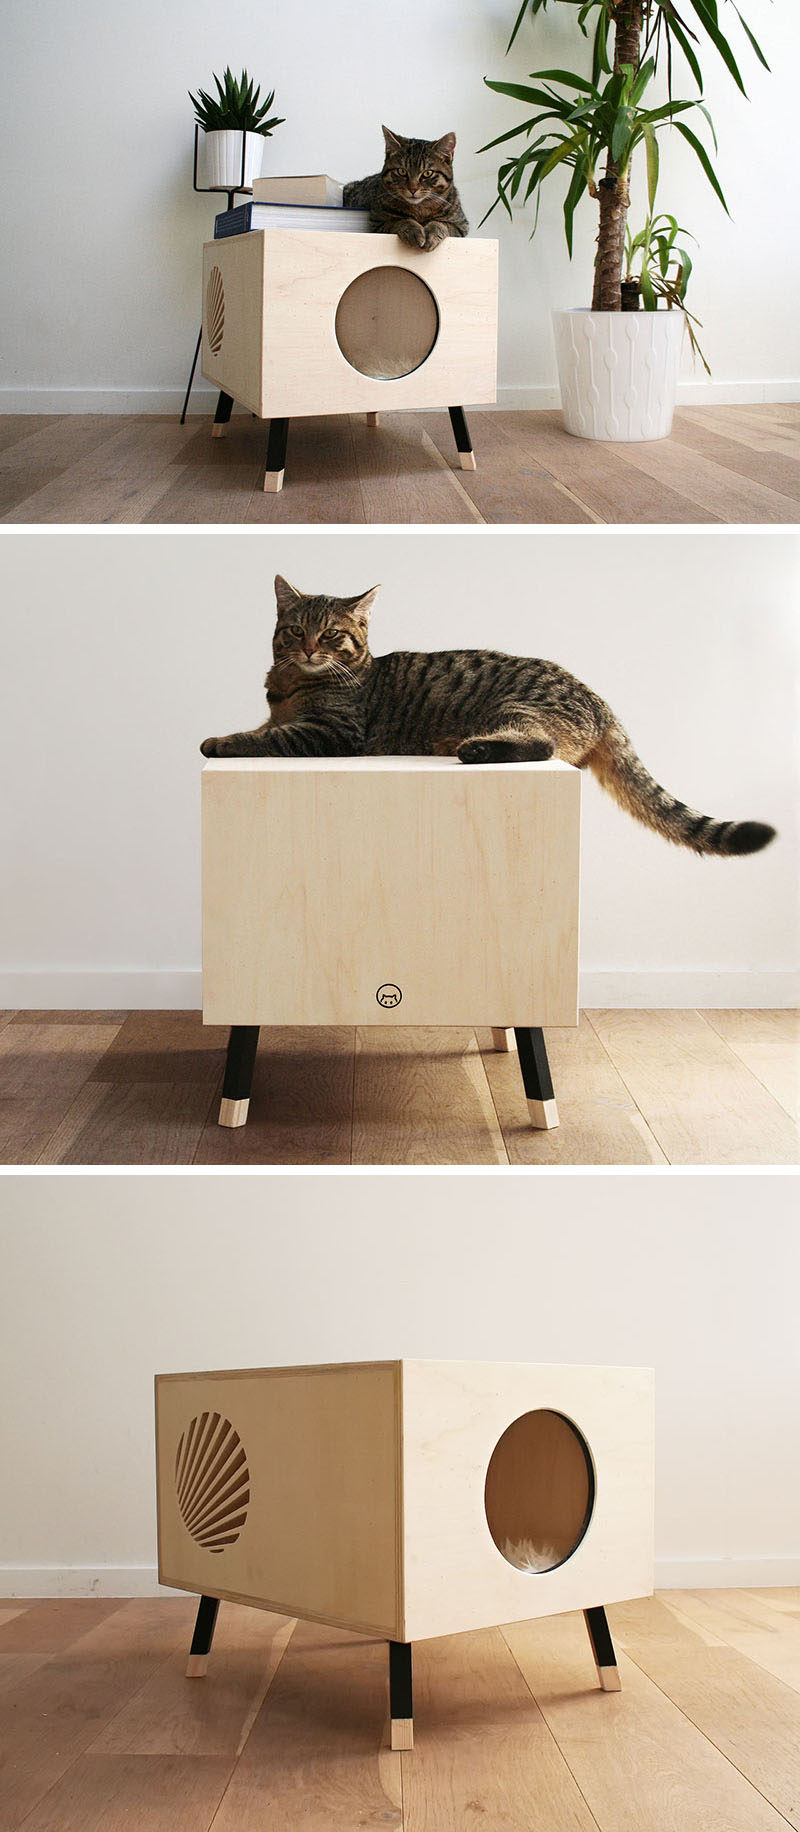 This modern cat bed / table named Nest, is made from high-end plywood, and as the design of the table is minimal, it can also double as a side table in any modern interior.